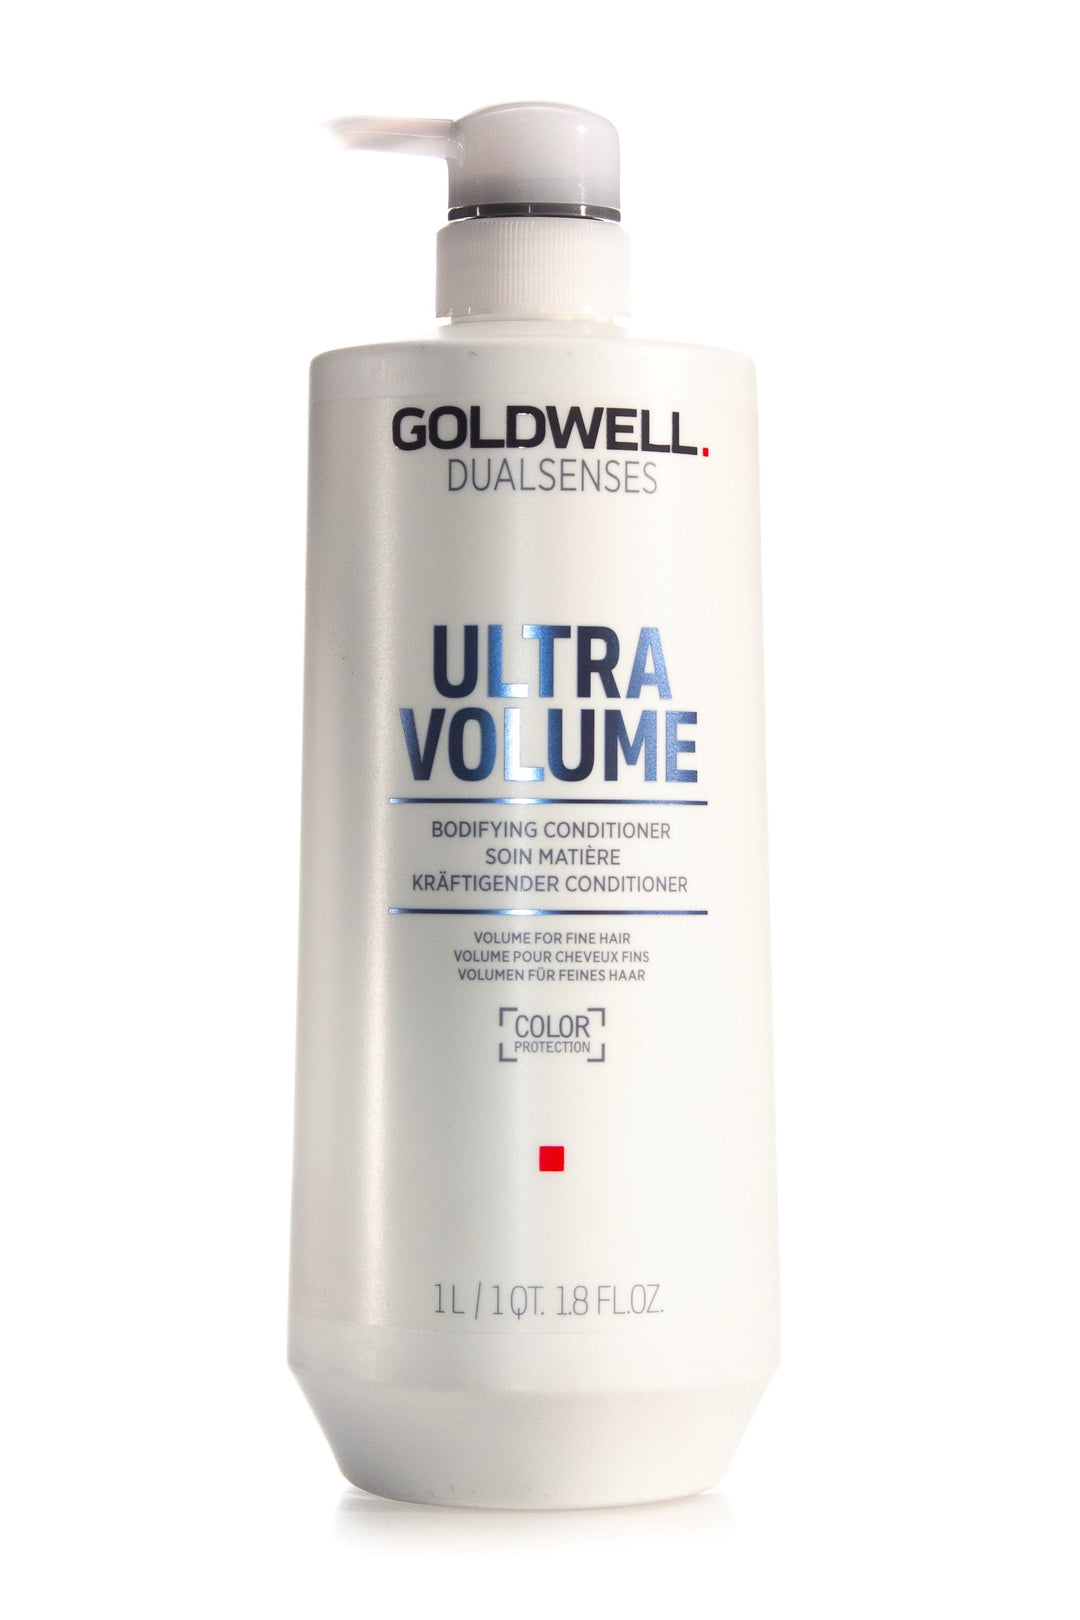 GOLDWELL Dual Senses Ultra Volume Bodifying Conditioner | Various Sizes